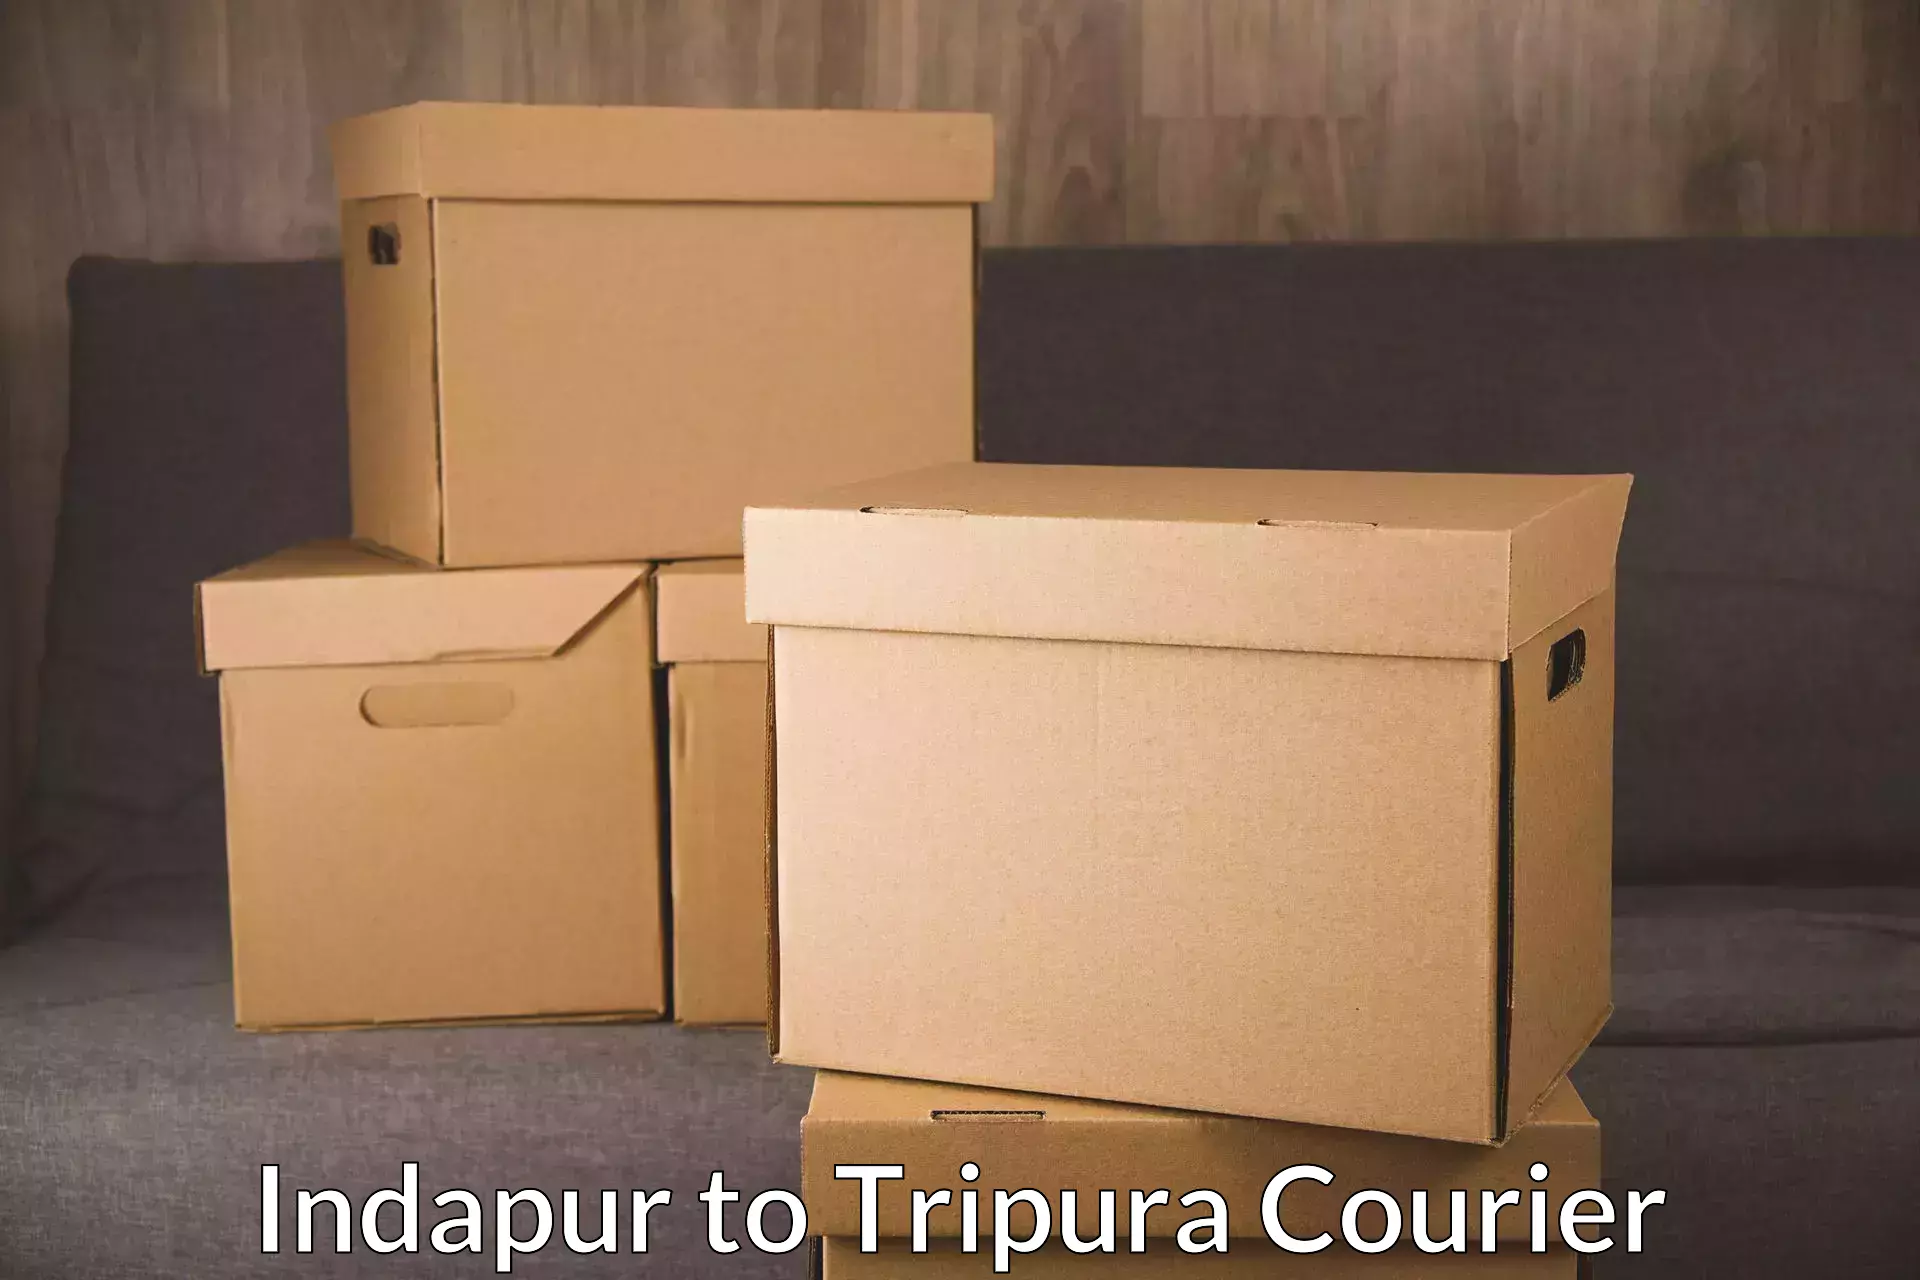 Online shipping calculator Indapur to Udaipur Tripura